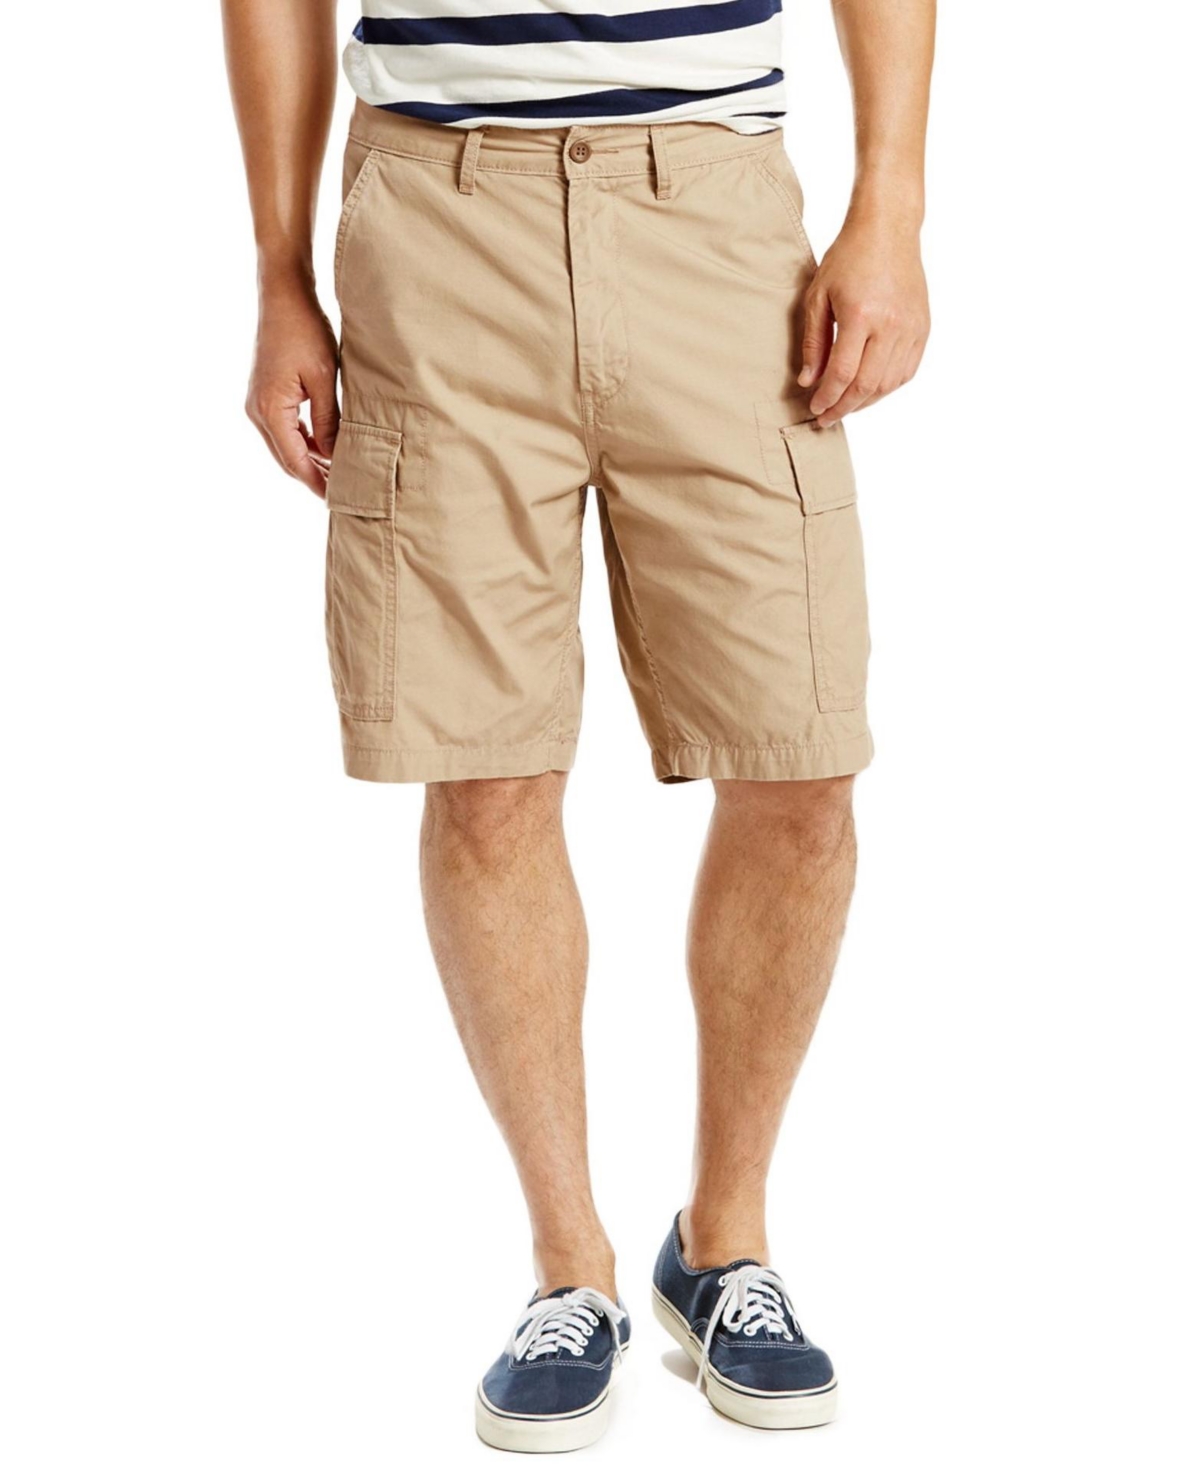 UPC 193239486827 product image for Levi's Men's Big and Tall Loose Fit Carrier Cargo Shorts | upcitemdb.com